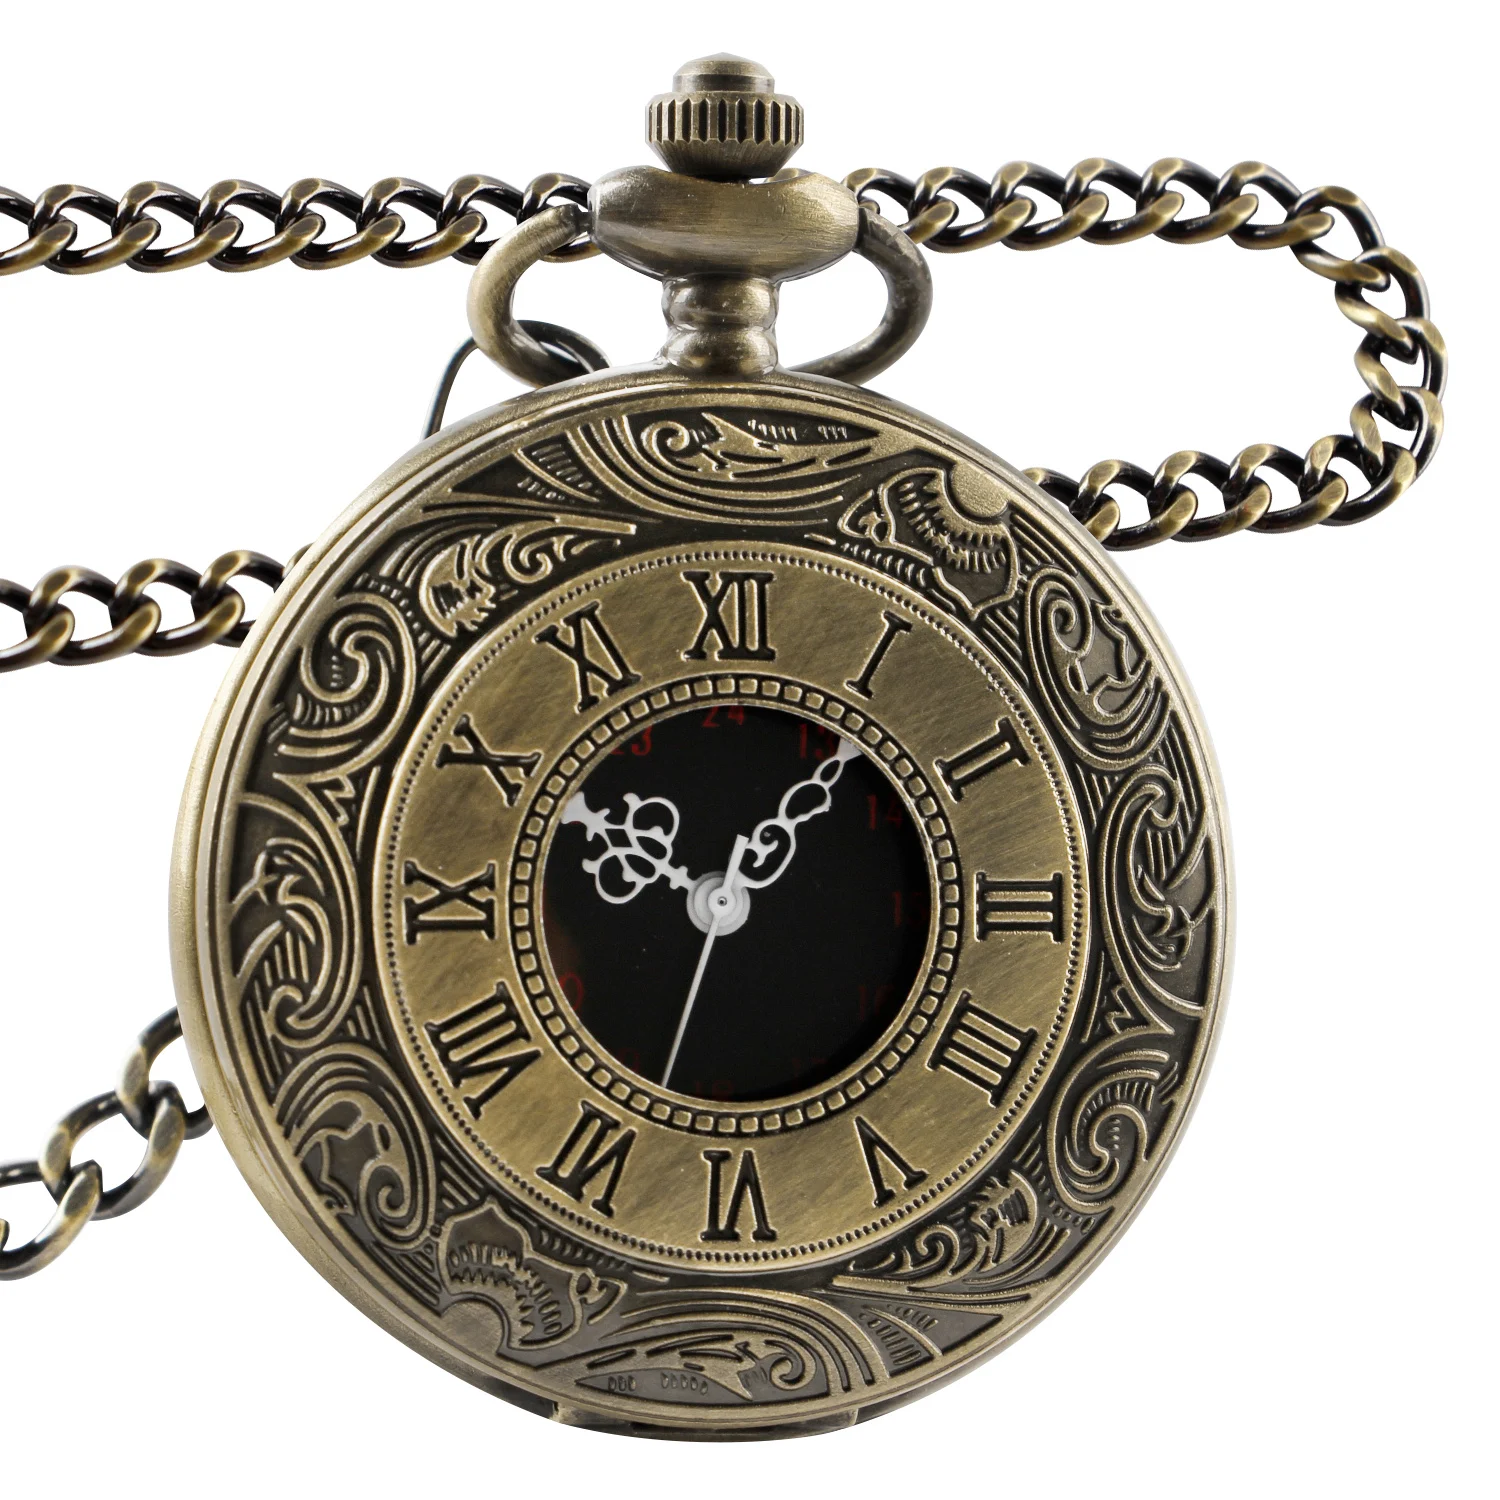 

Hot Selling Vintage Pocket Watch Roman Numerals Scale Quartz Pocket Watches with Chain Christmas Graduation Birthday Gifts